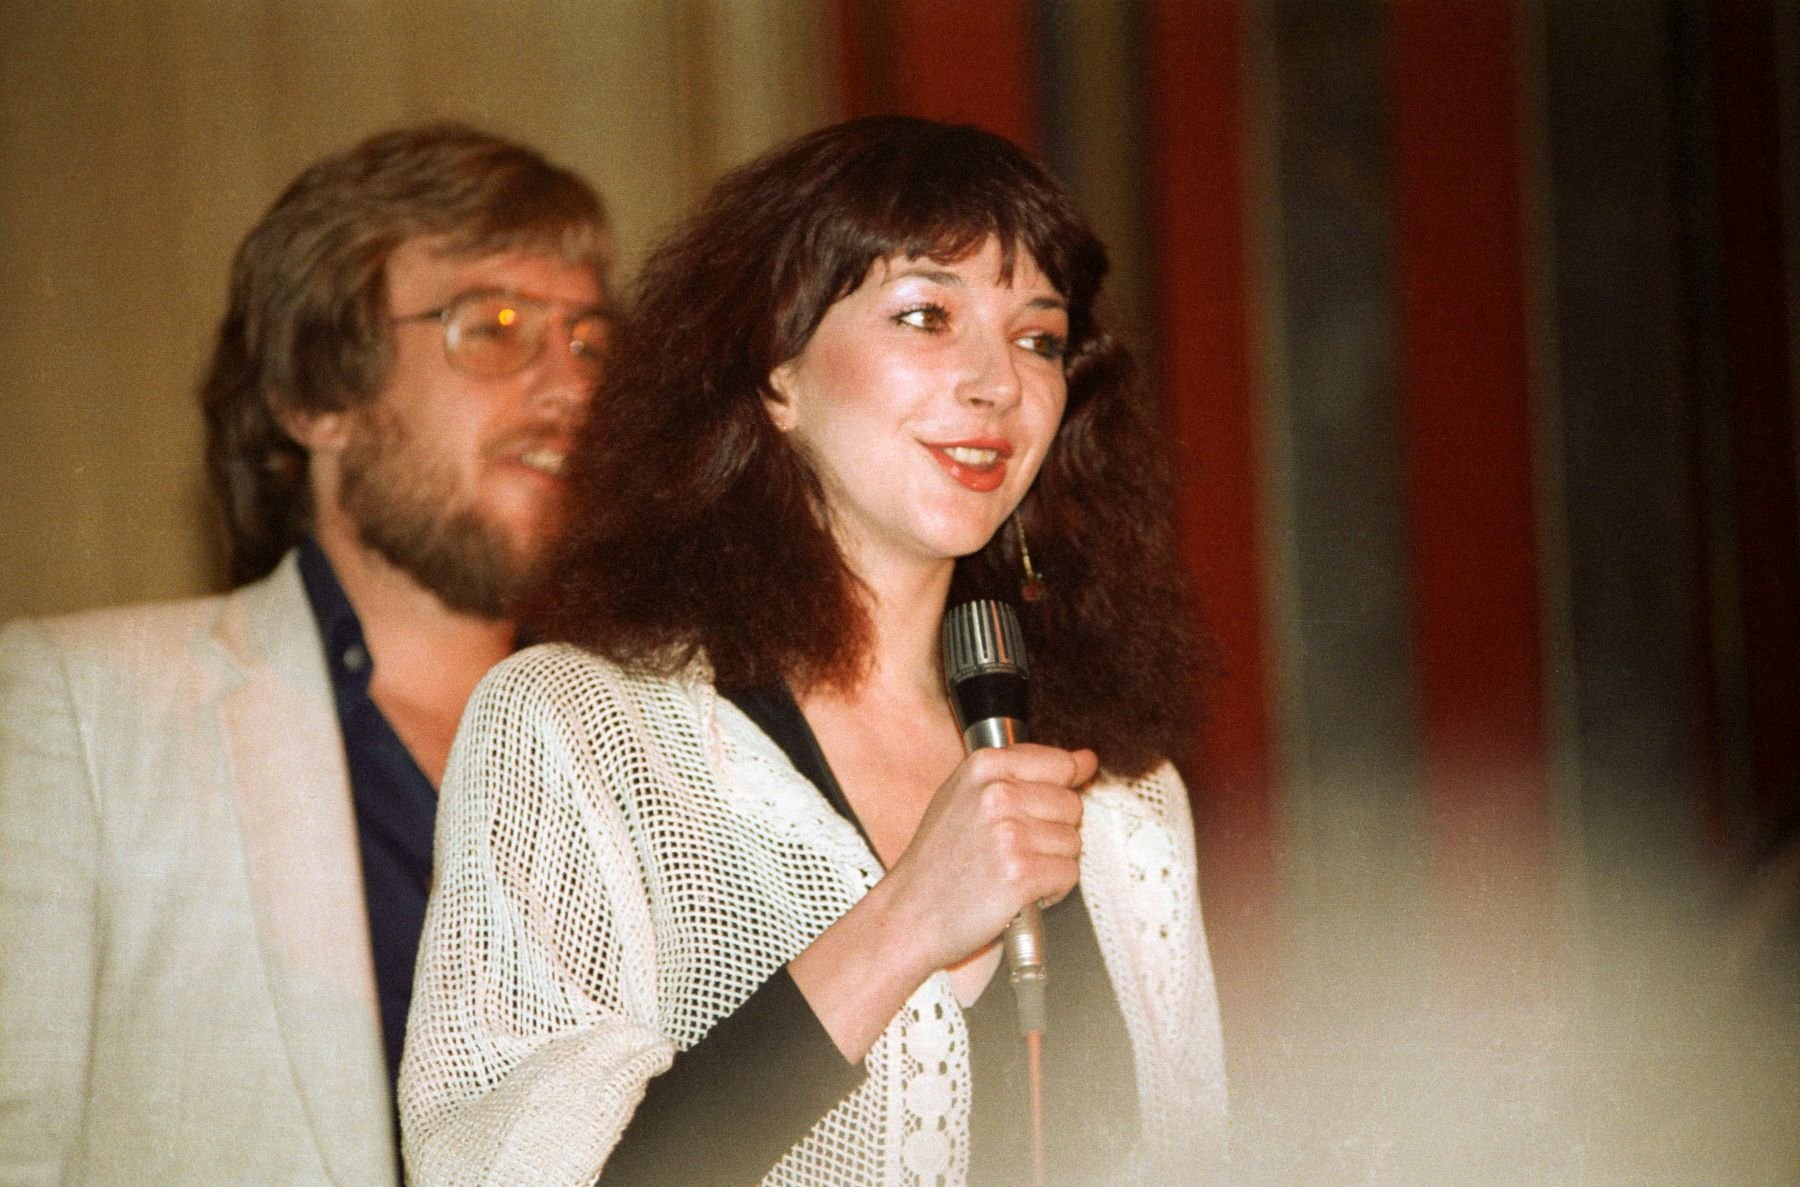 Kate Bush at the 1980 Kate Bush Convention at the Empire Theatre in Leicester Square in London